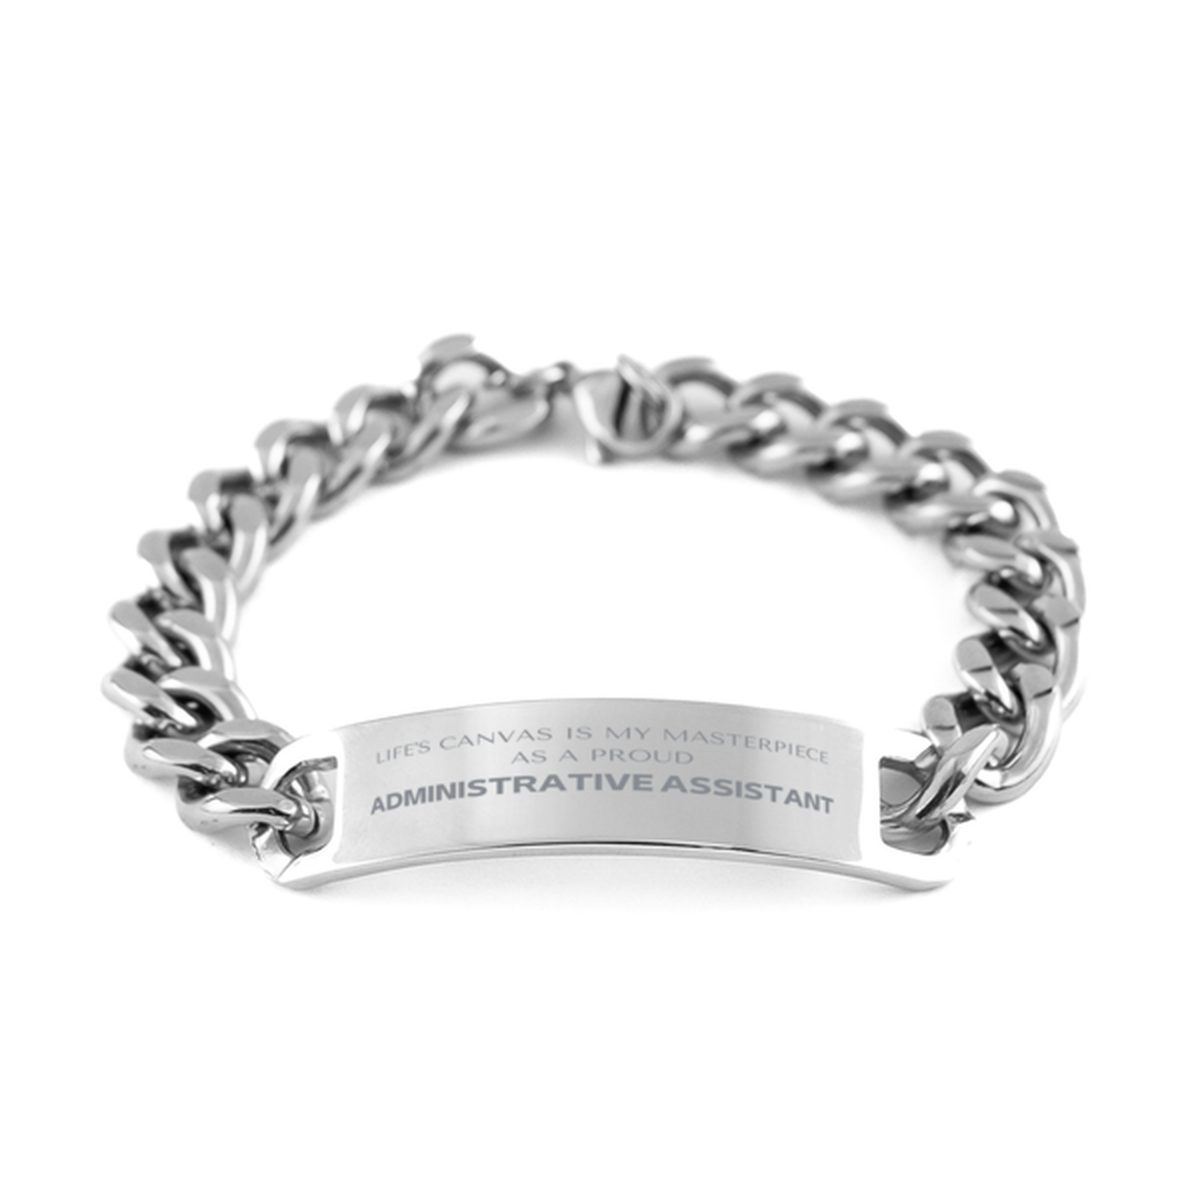 Proud Administrative Assistant Gifts, Life's canvas is my masterpiece, Epic Birthday Christmas Unique Cuban Chain Stainless Steel Bracelet For Administrative Assistant, Coworkers, Men, Women, Friends